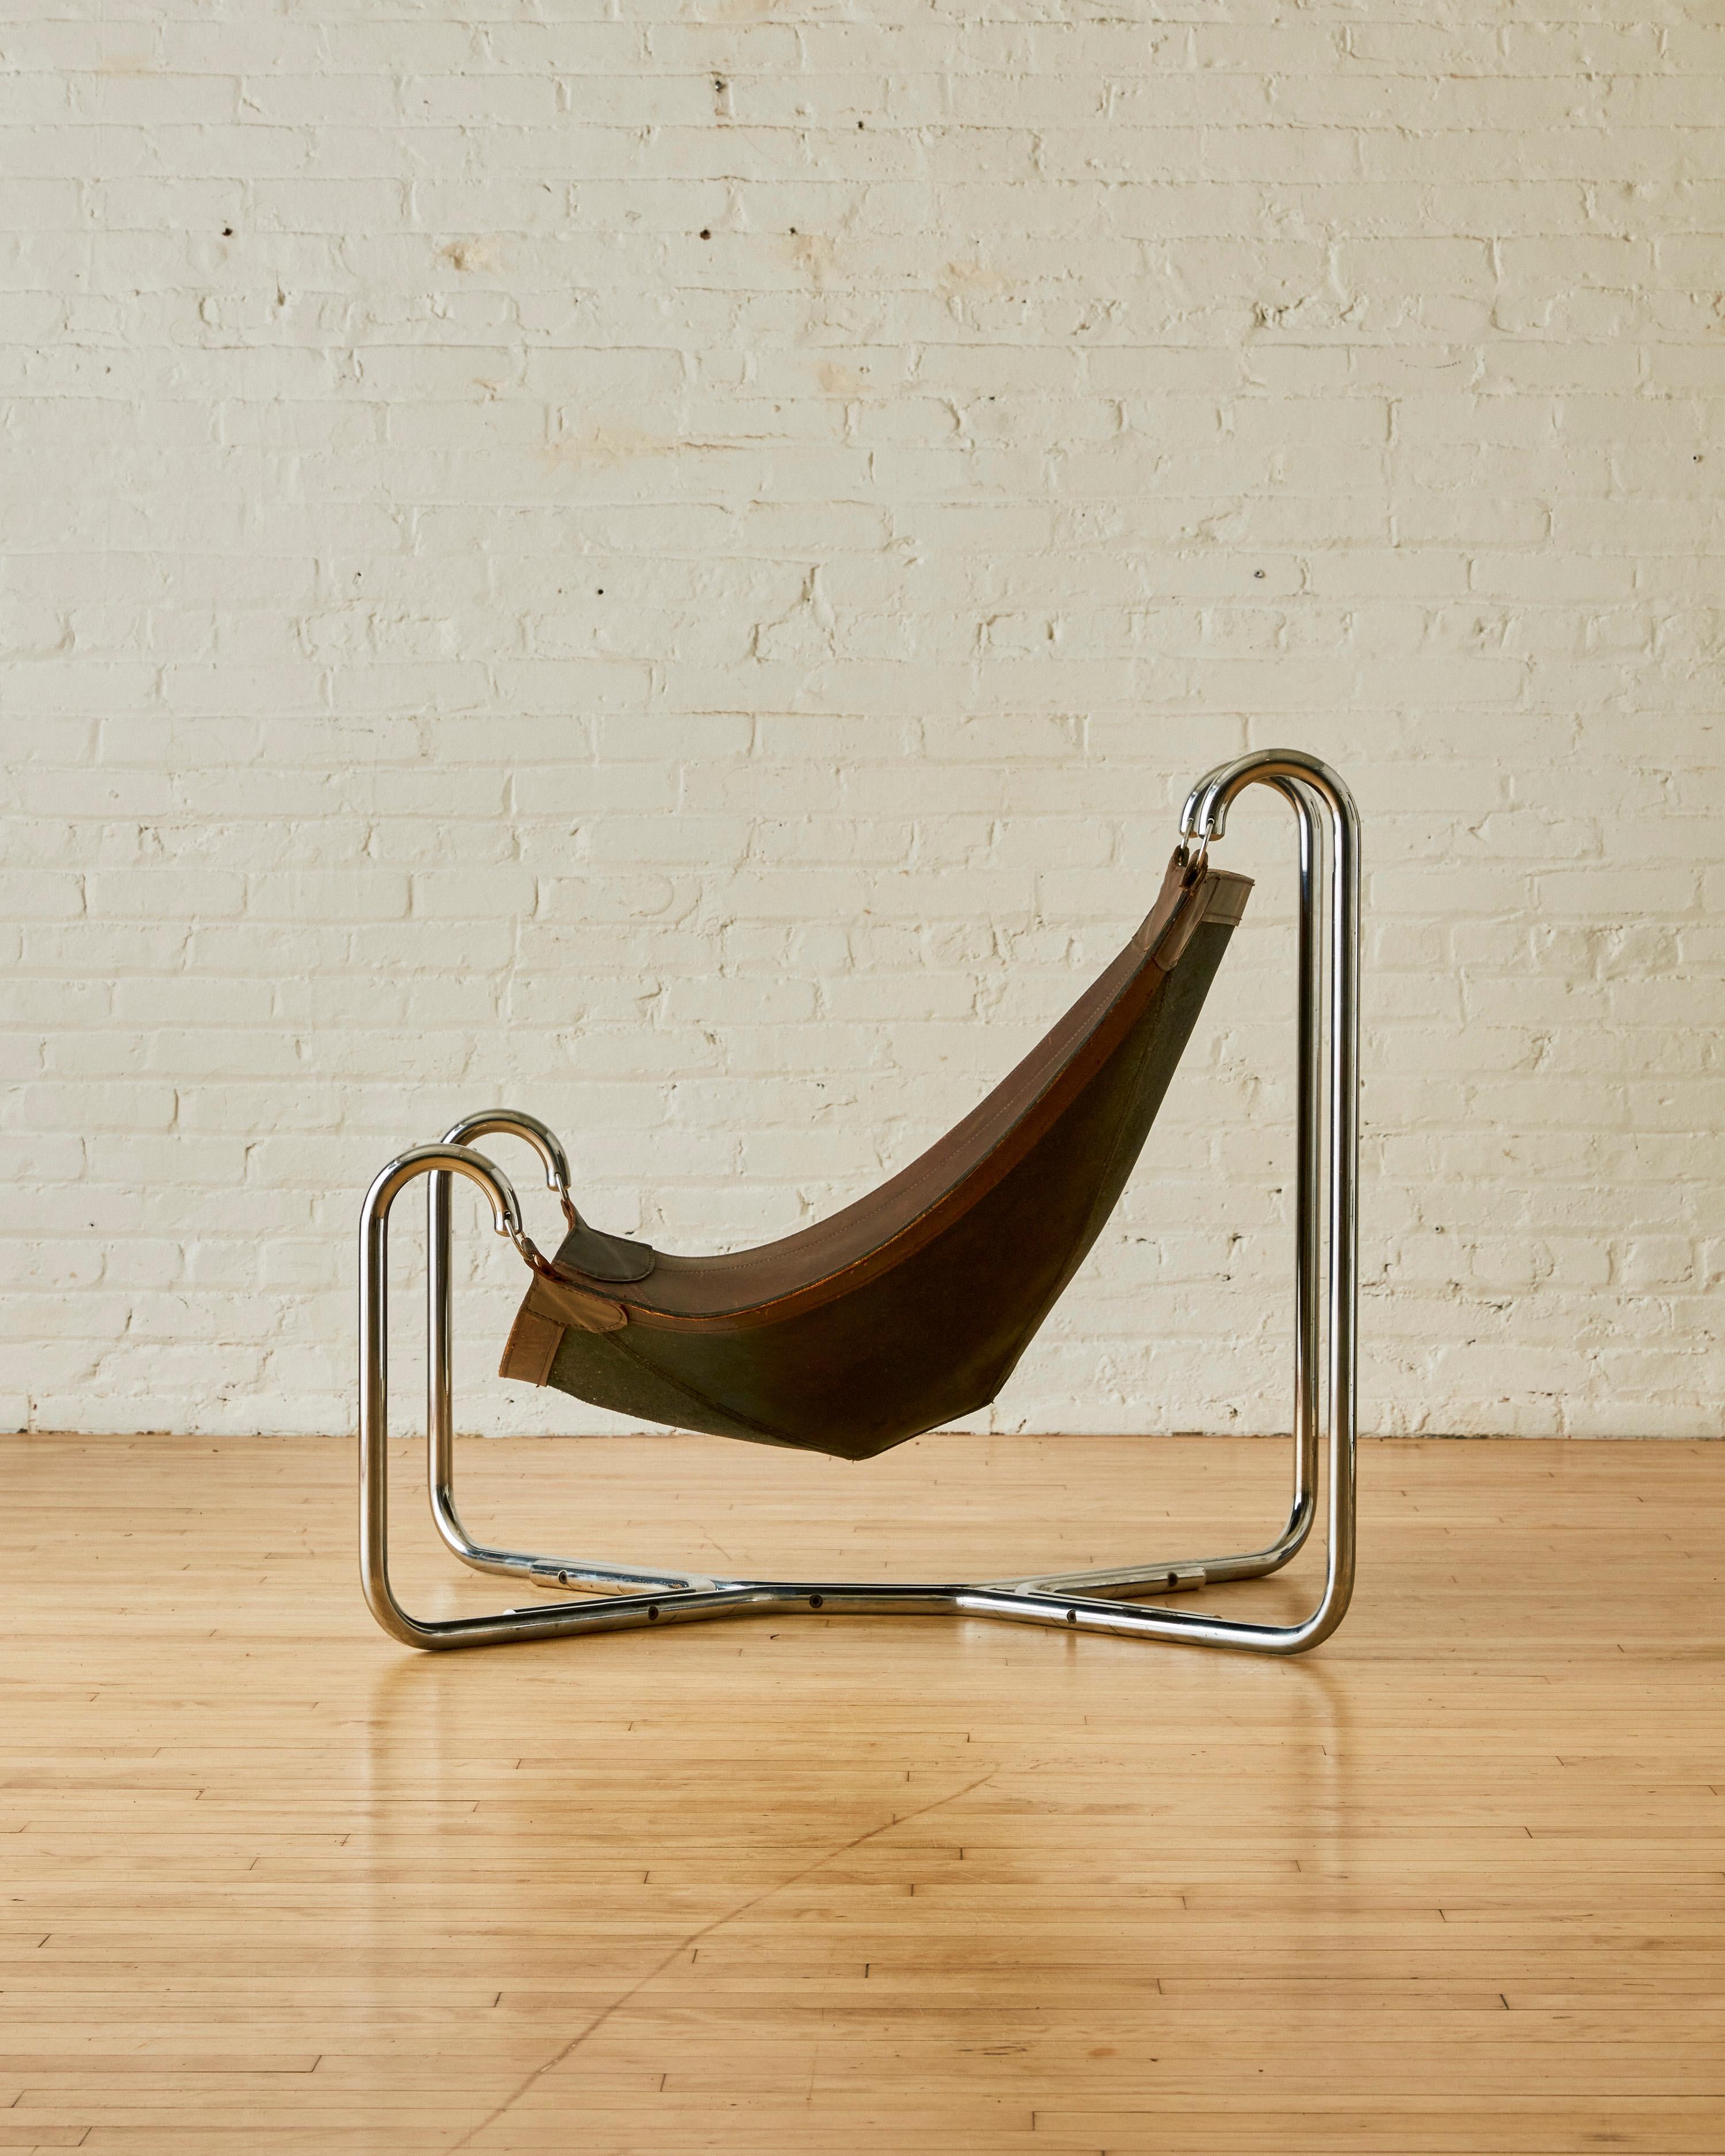 Mid-Century Modern Baffo armchair by Gianni Pareschi and Ezio Didoni for Dam, by Busnelli For Sale